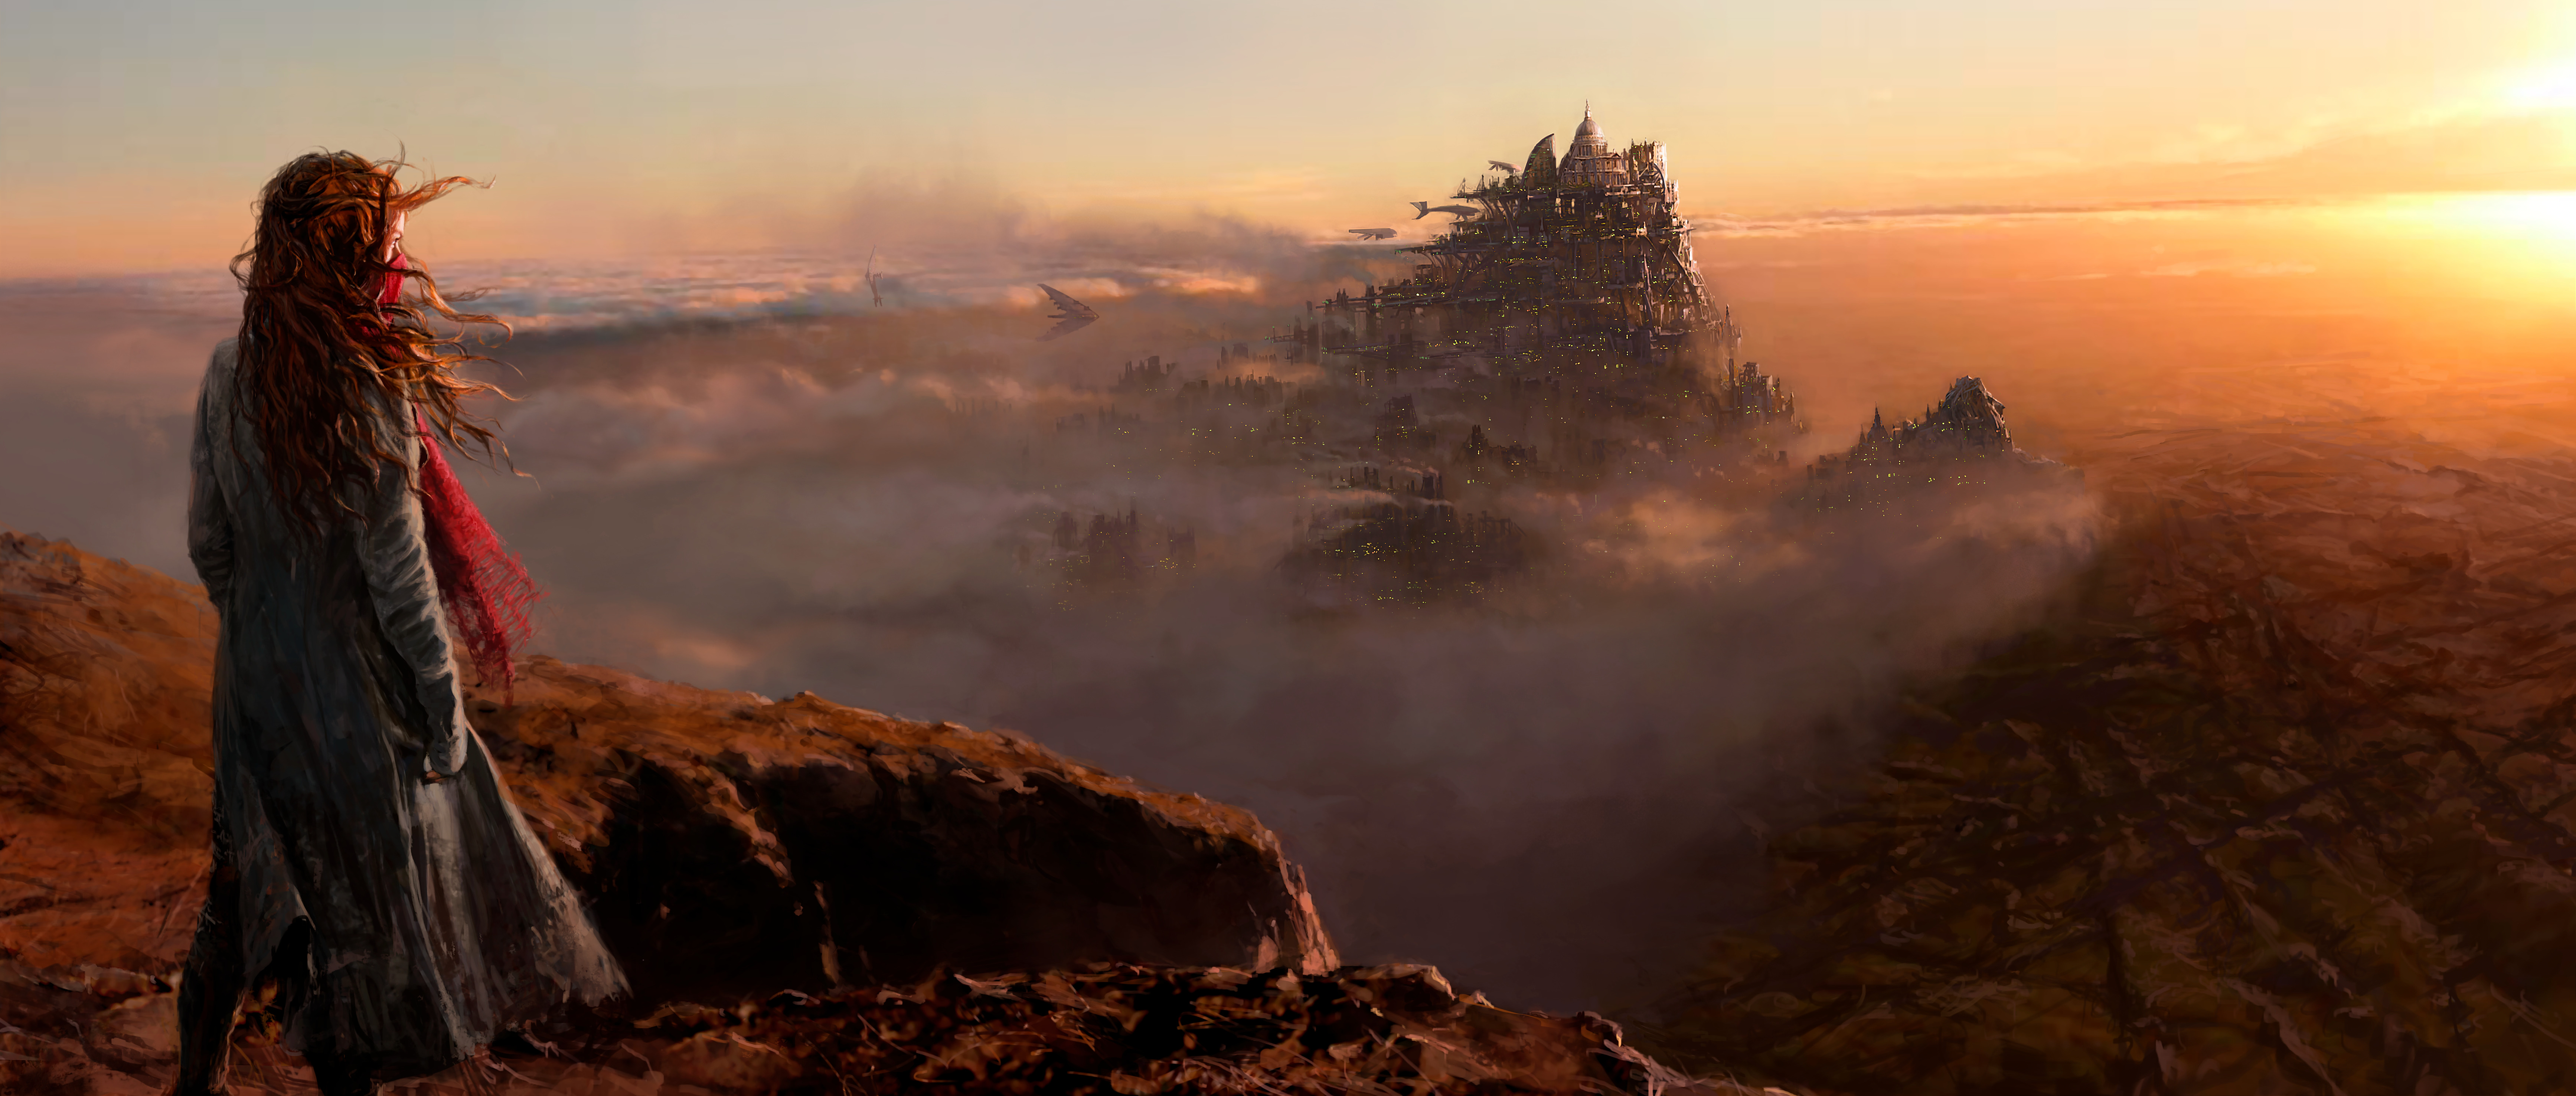 Mortal Engines still (Universal Pictures)